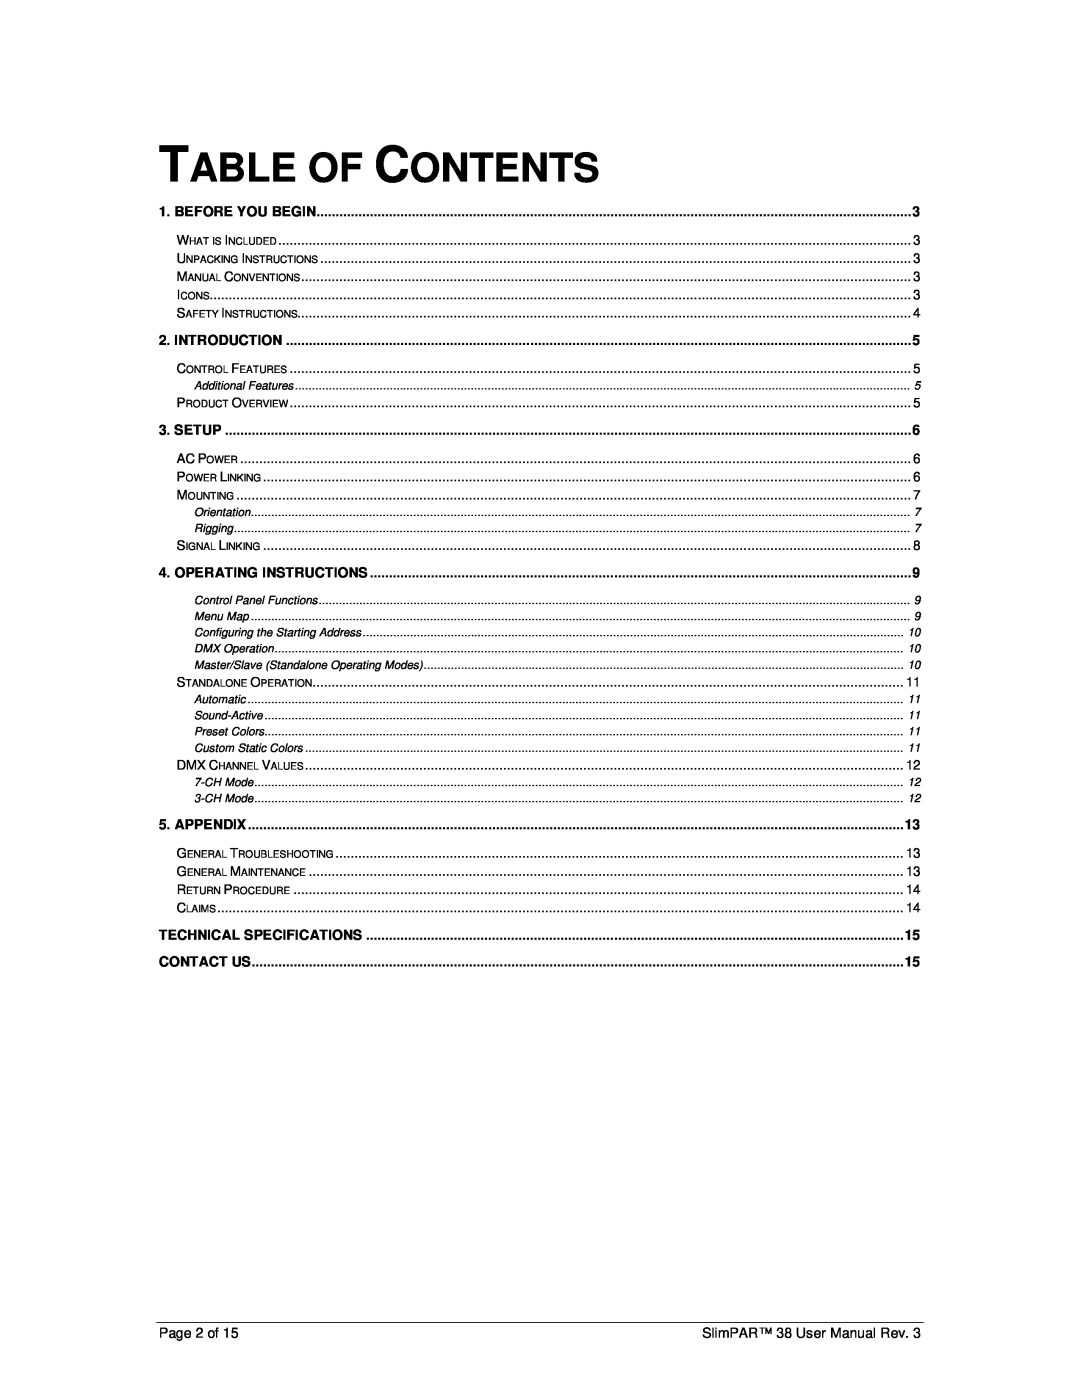 Chauvet user manual Table Of Contents, Page 2 of, SlimPAR 38 User Manual Rev 